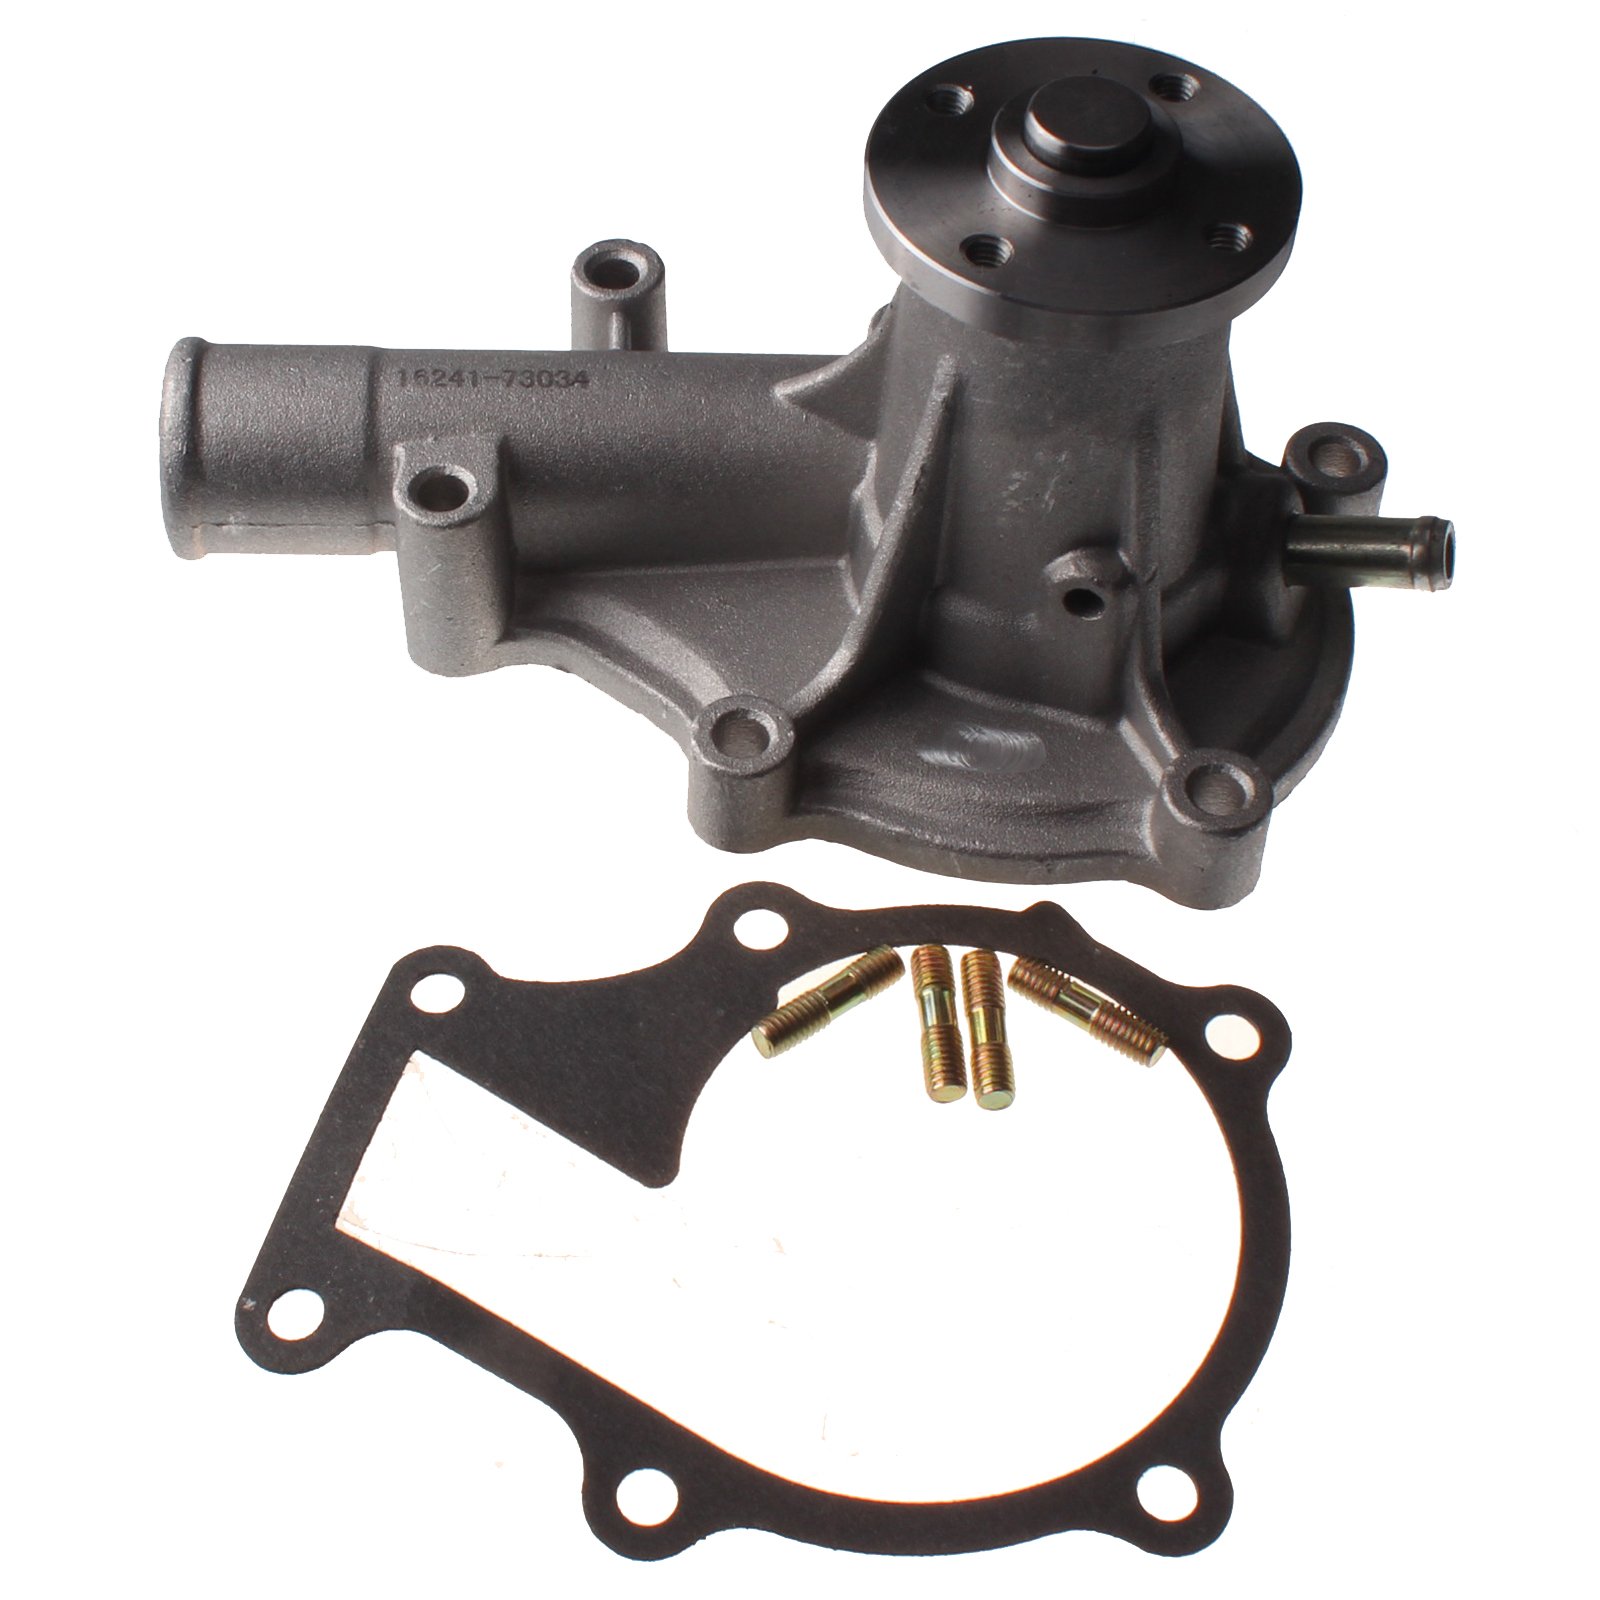 HOLDWELL 60mm Water Pump 16241-73034 compatible with Kubota Engine V1505 D1105 D905 von Holdwell